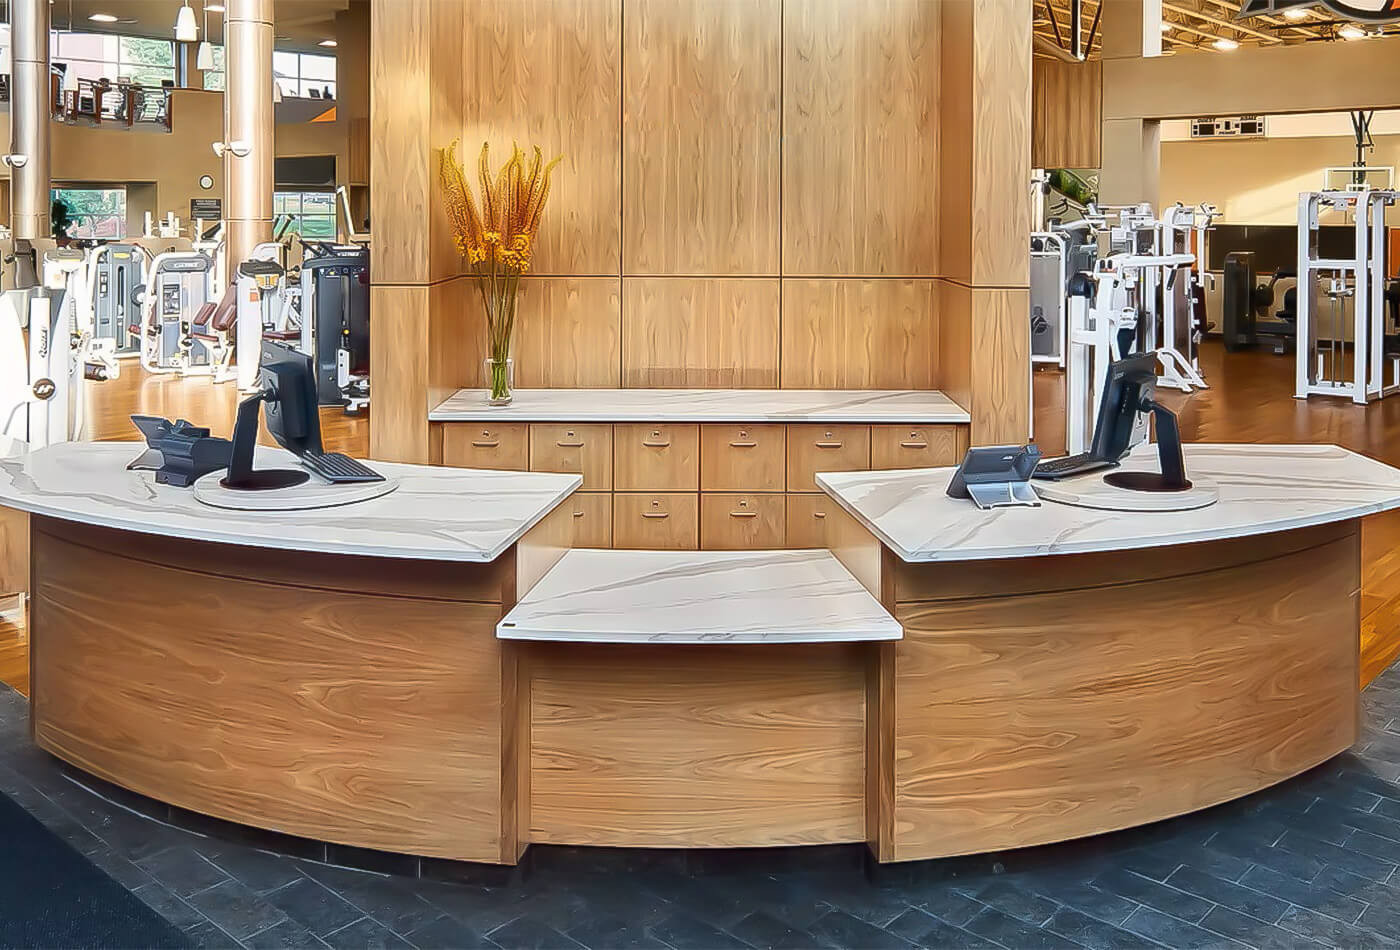 Stylish Curved Reception Desk: First Impressions Count!